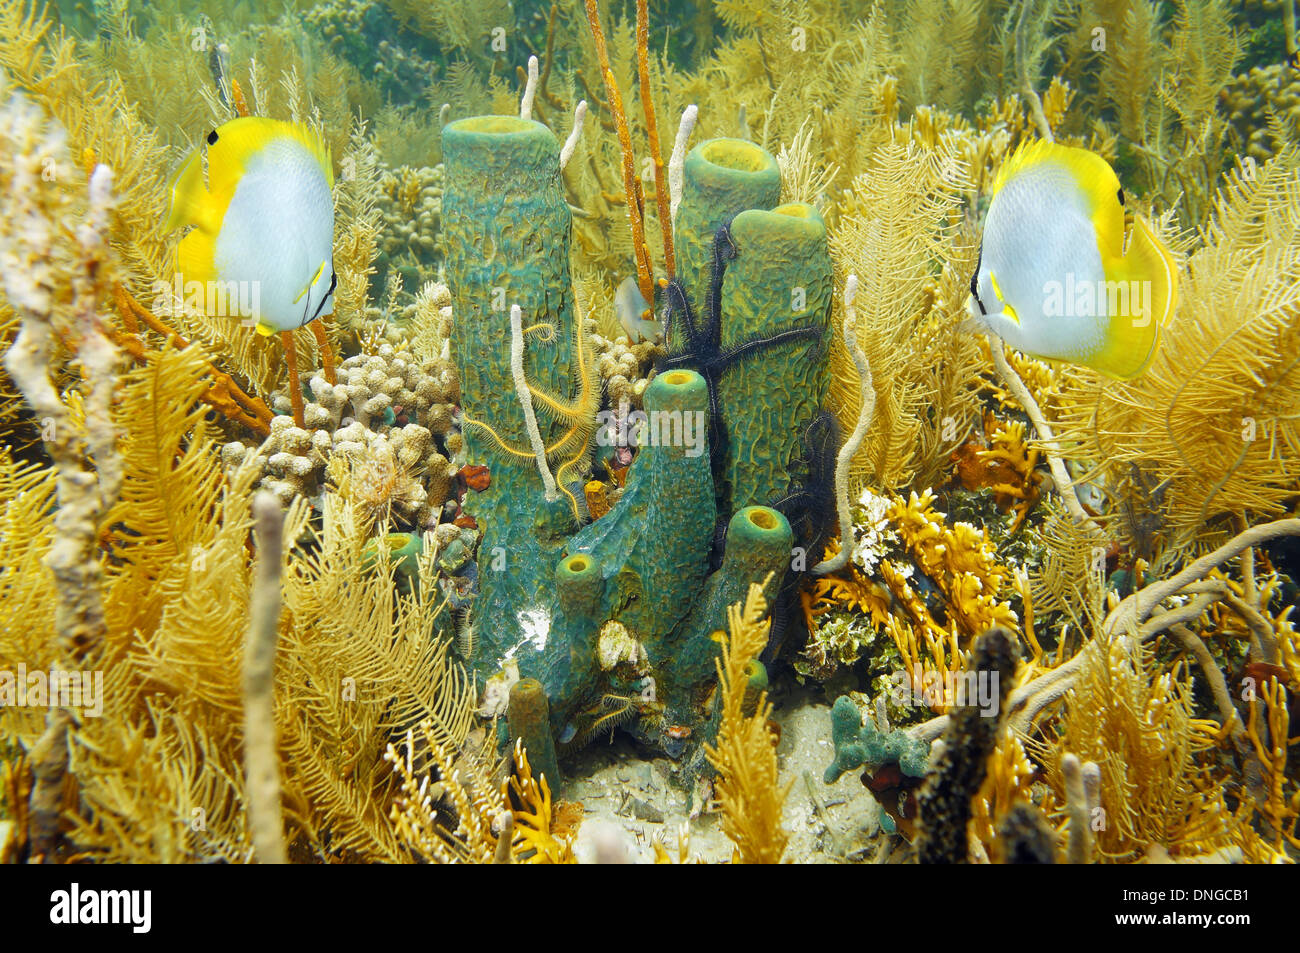 Underwater sea life Branching tube sponge in a coral garden with sponge brittle star and butterfly fish, Caribbean sea Stock Photo